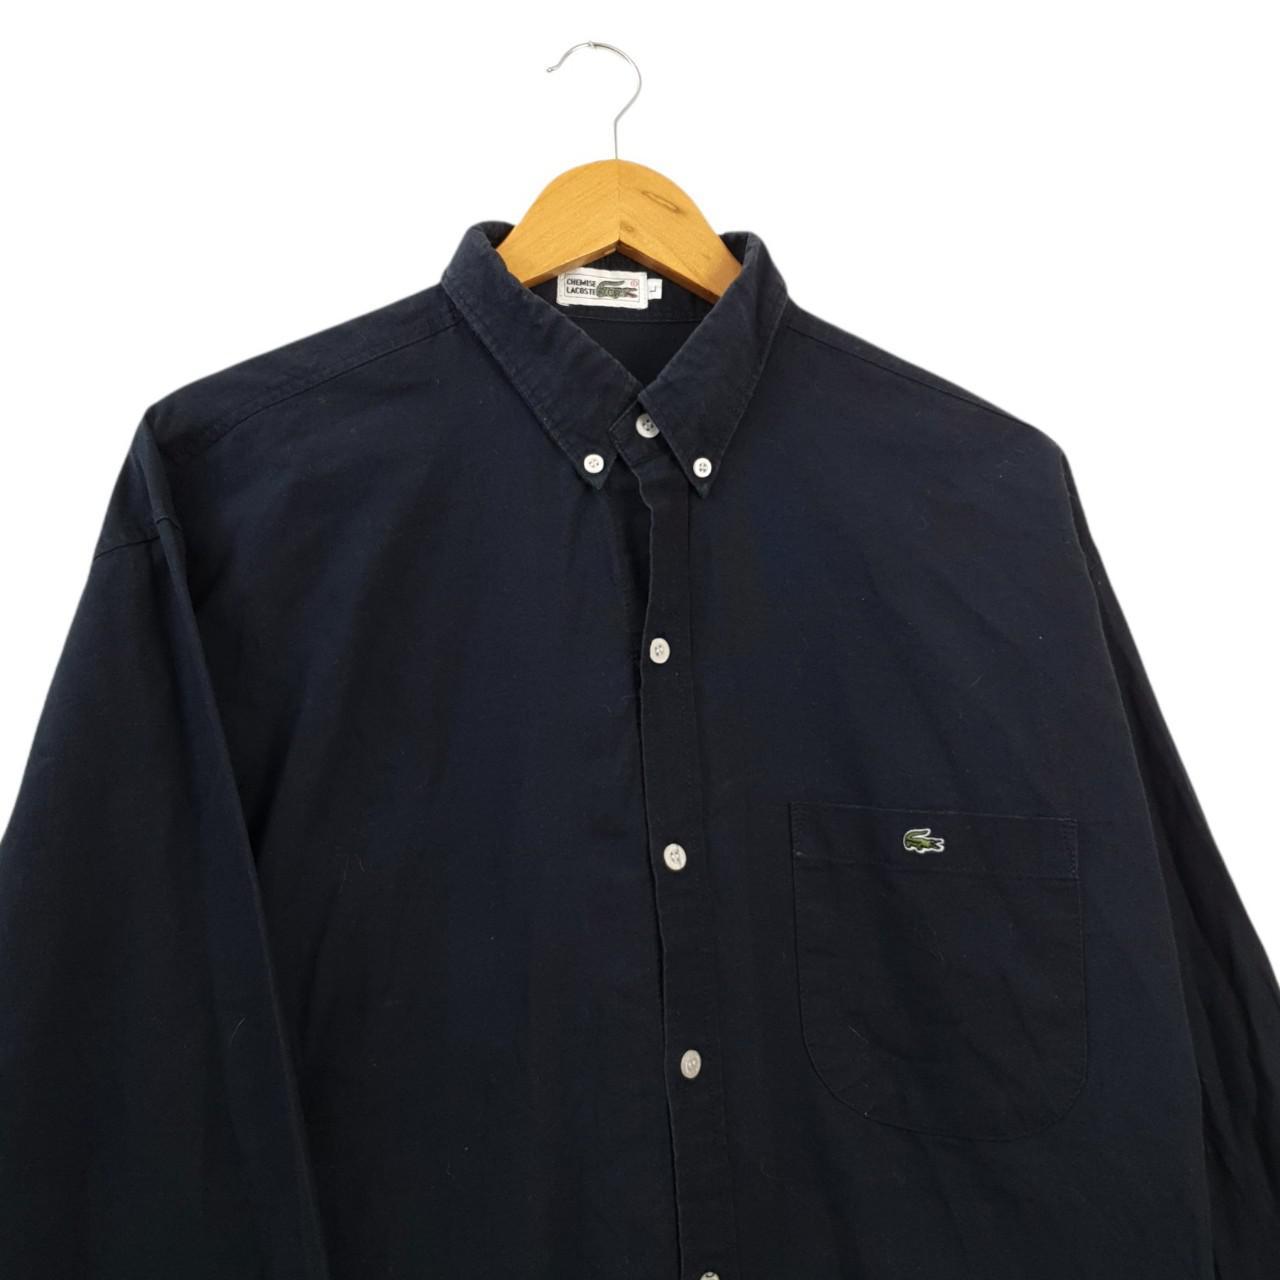 Lacoste Men's Navy and Black